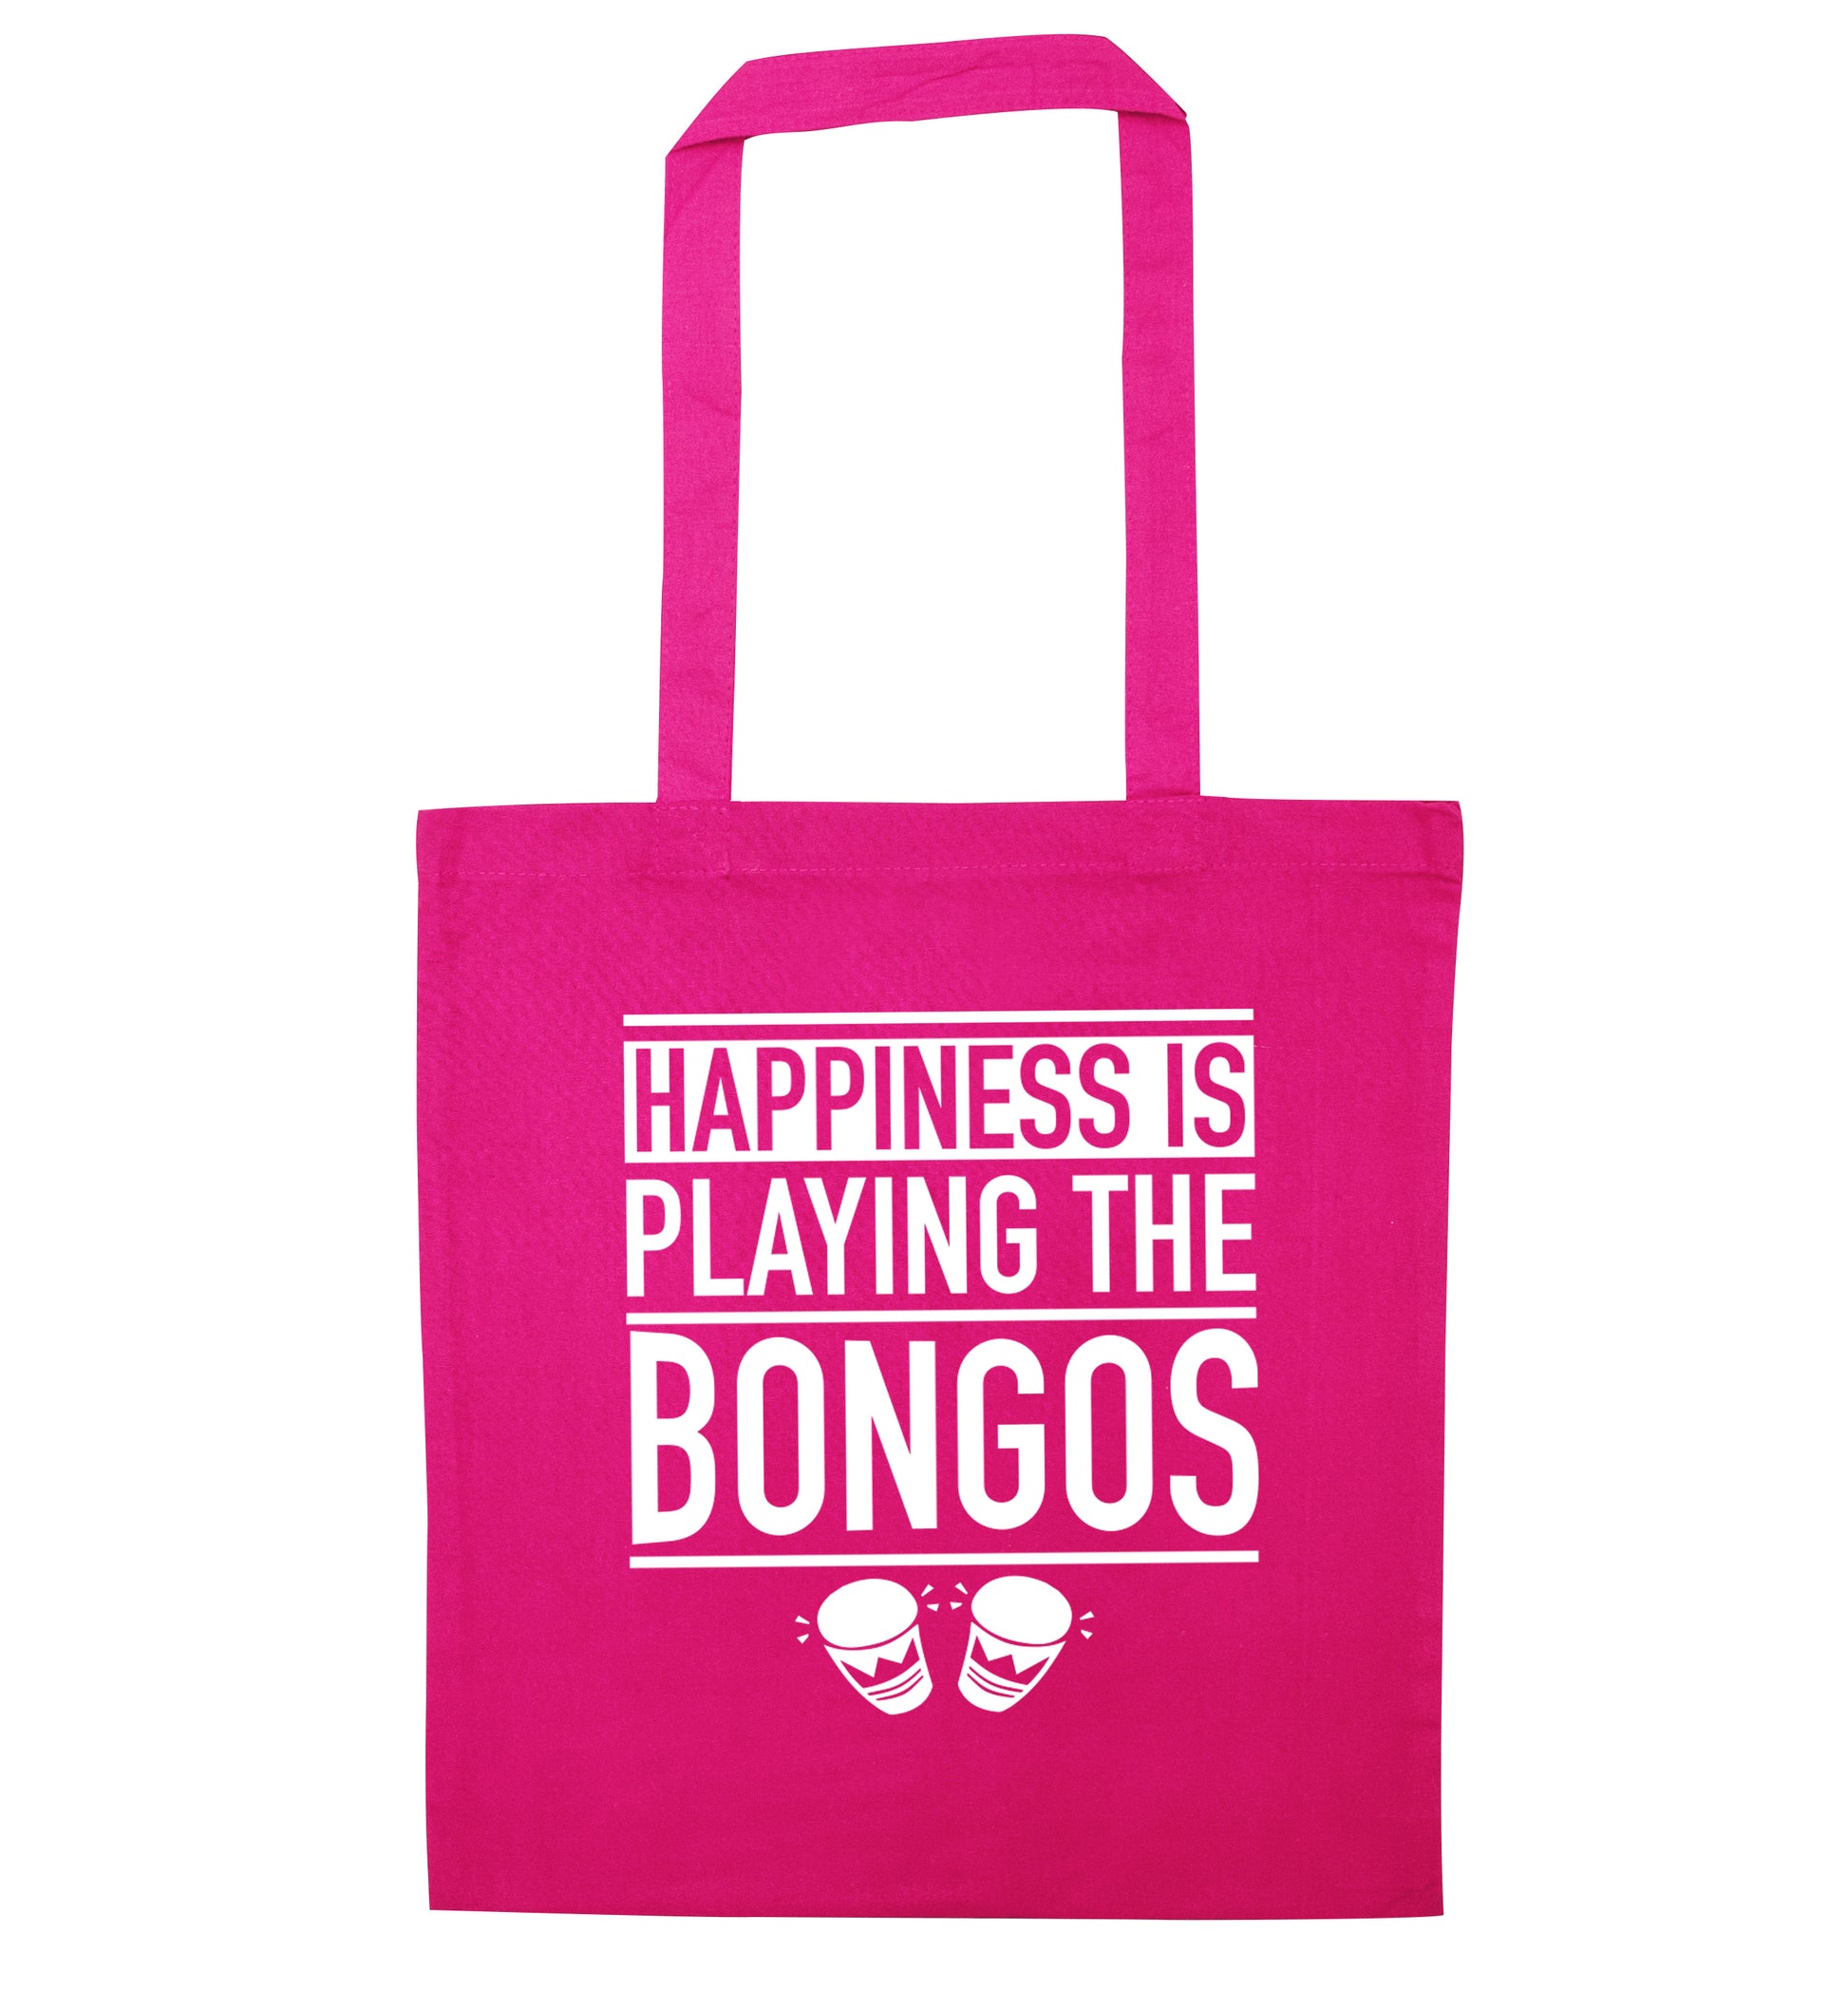 Happiness is playing the bongos pink tote bag